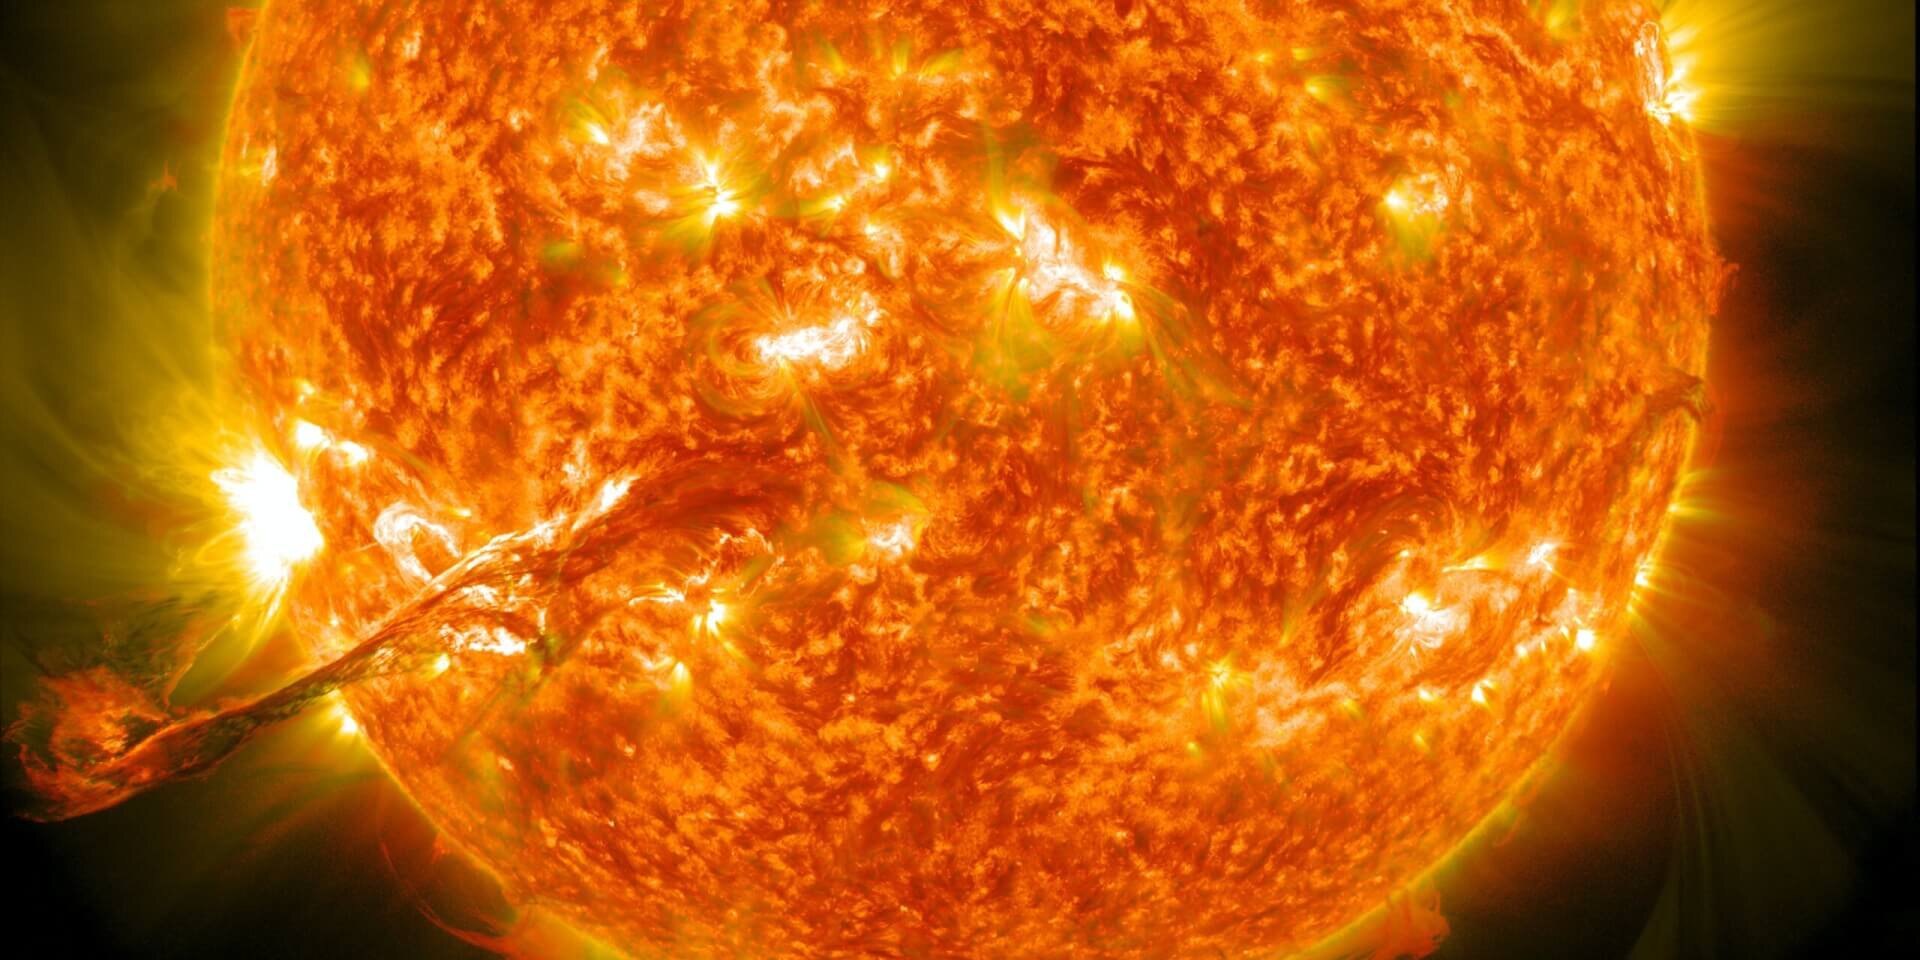 Image of the sun showing a coronal mass ejection erupting